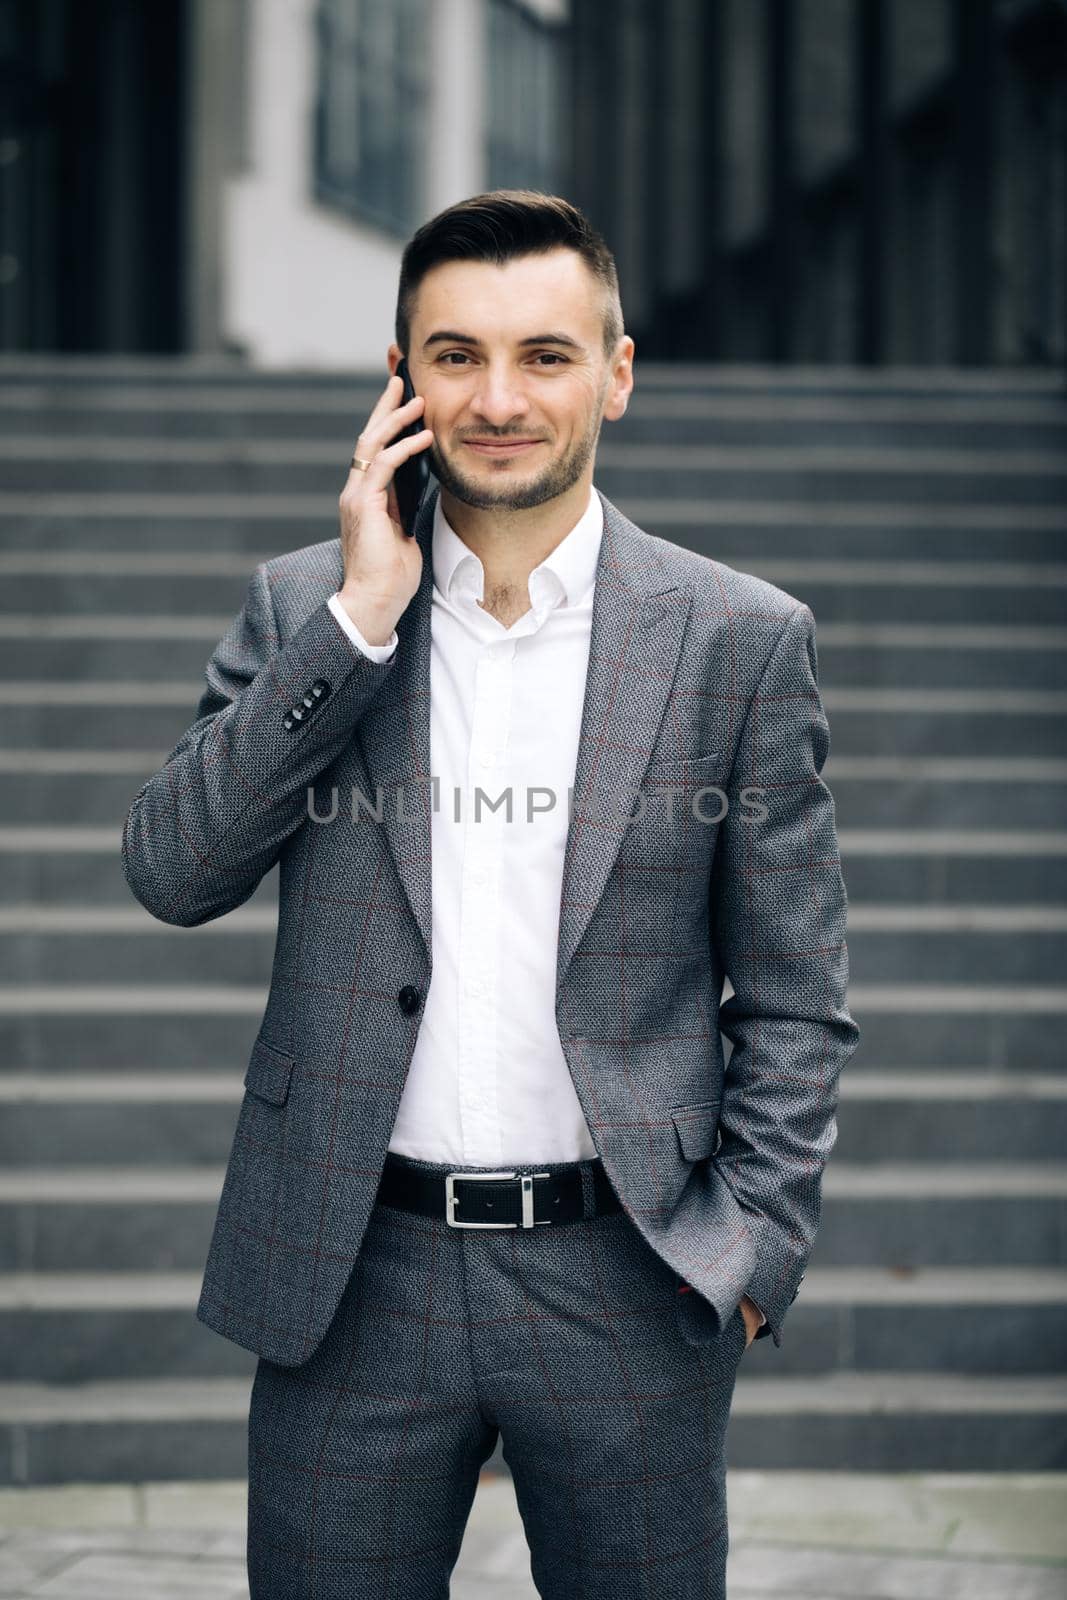 European businessman talking on mobile phone near office building background. Man is in dialogue, smiling, holding coffee cup on summer day.